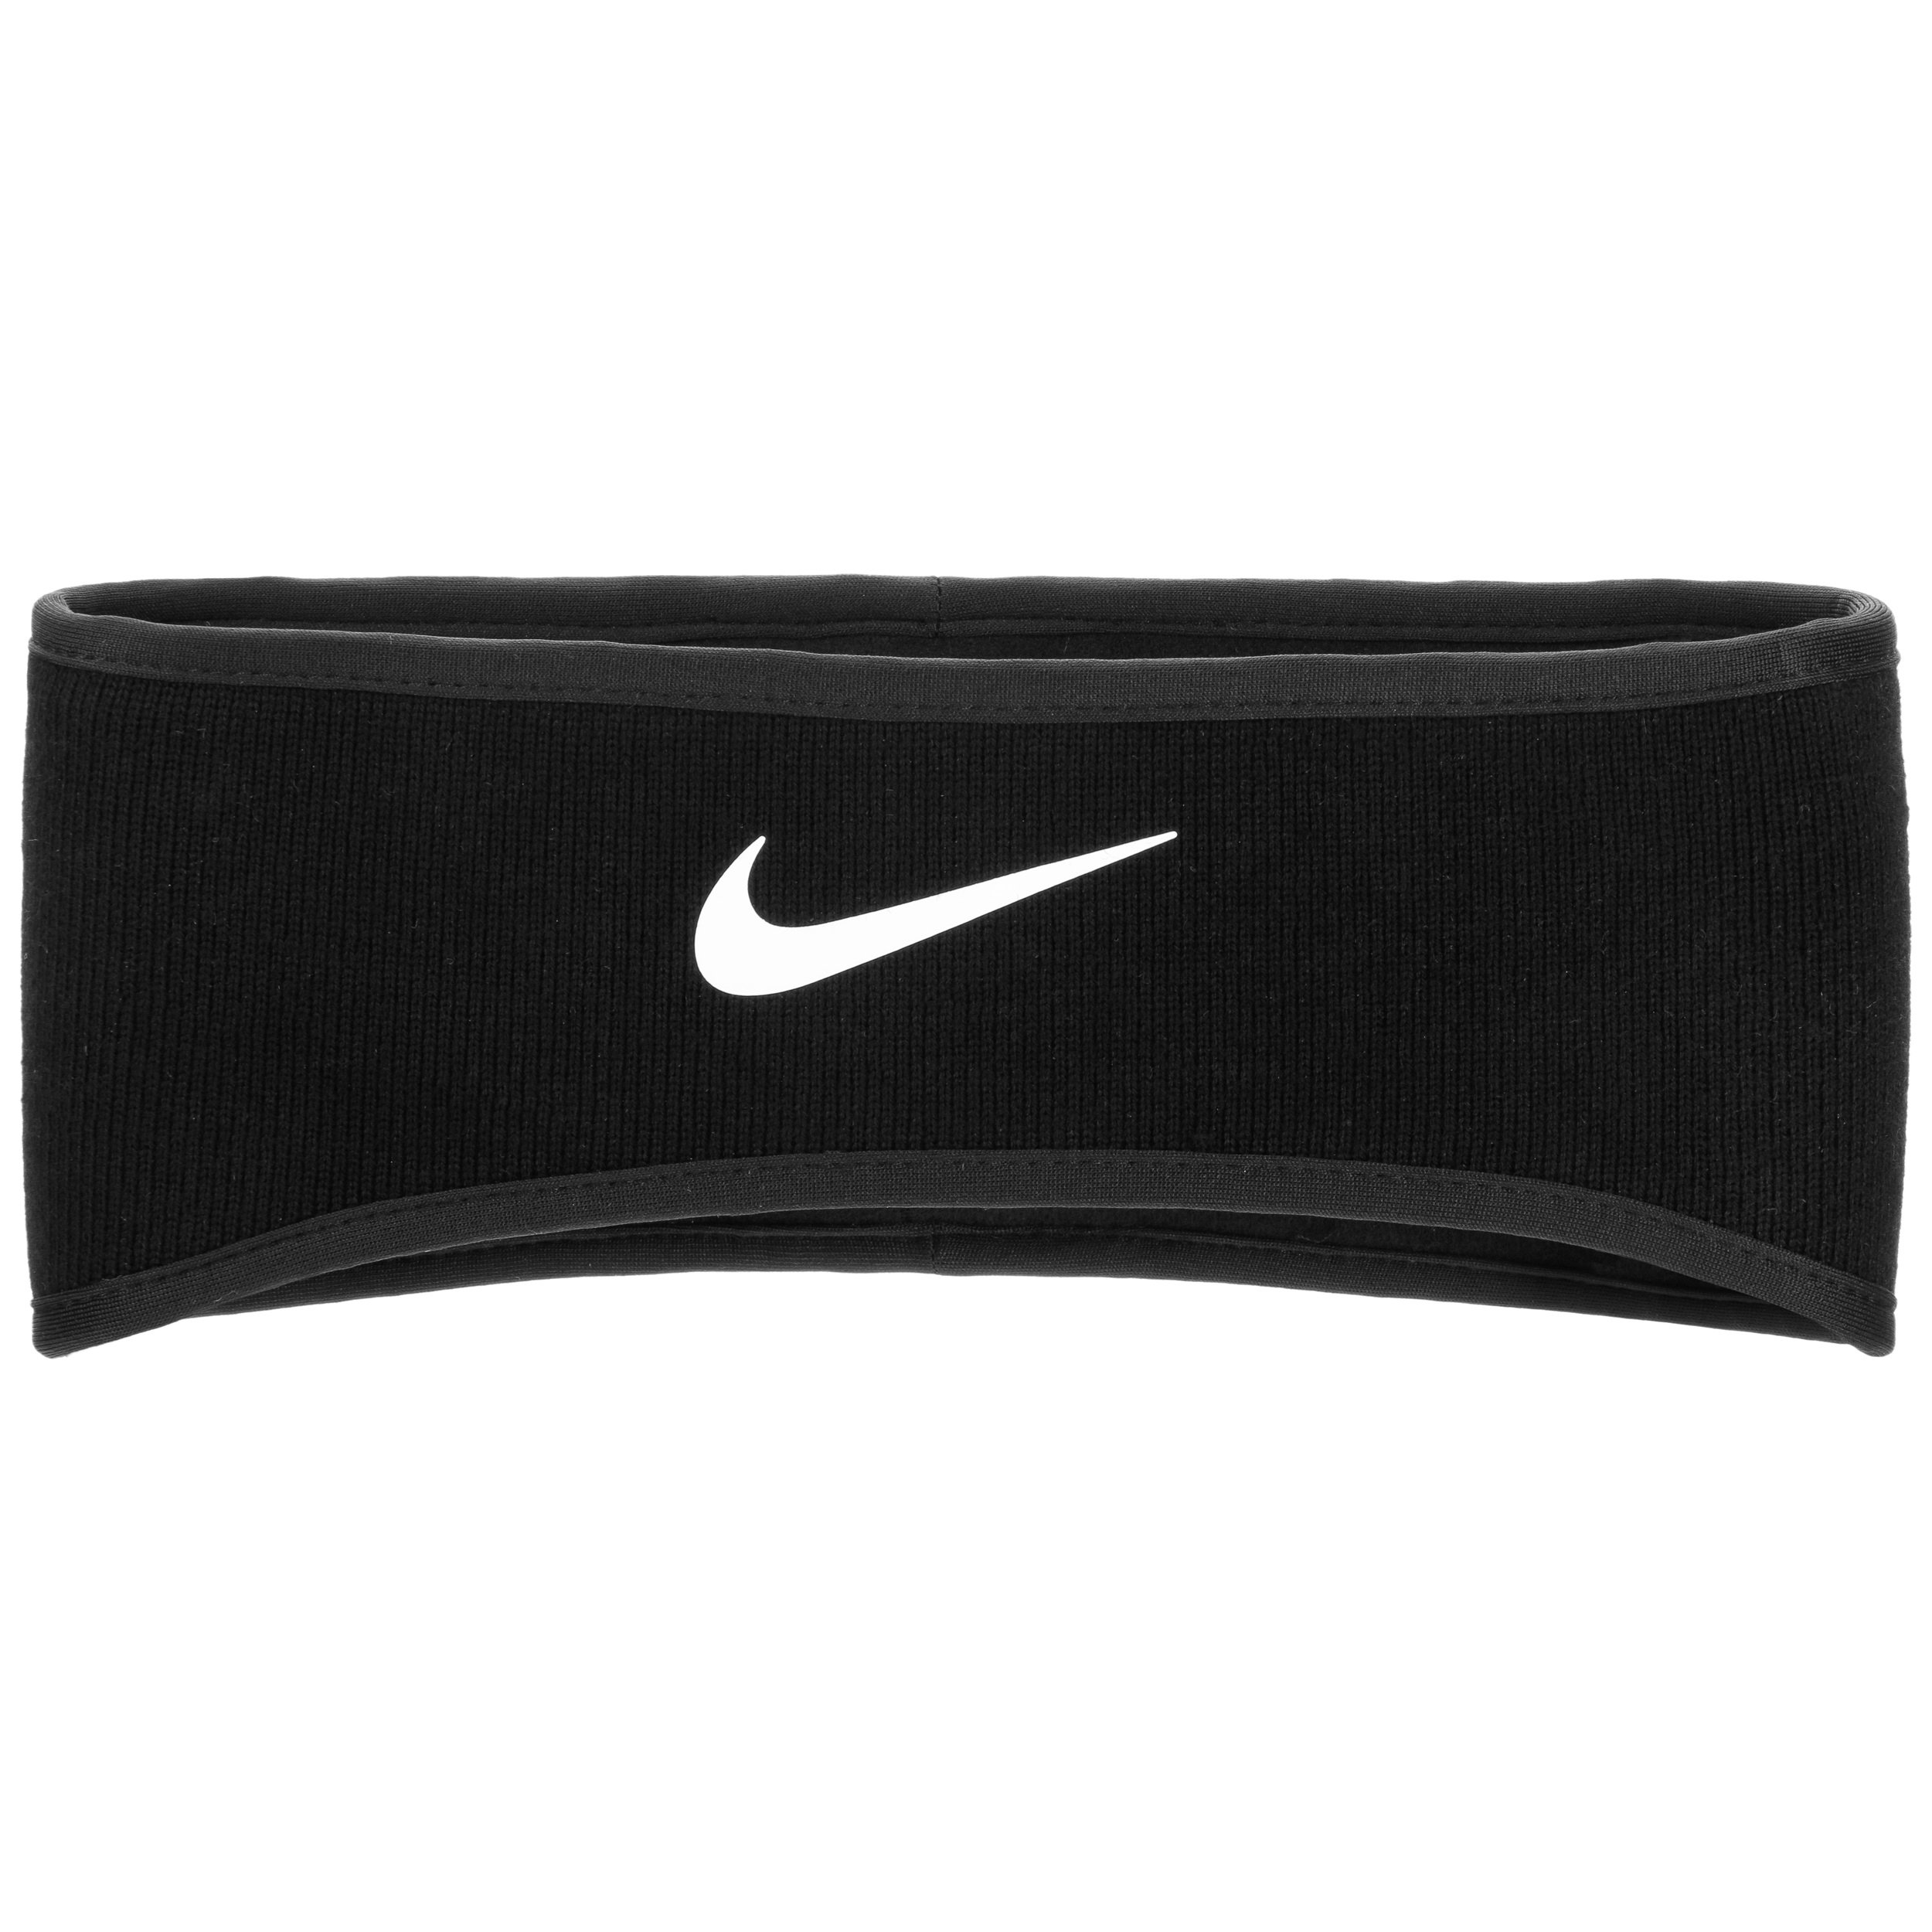 Bandeau New Knit by Nike - 34,95 €